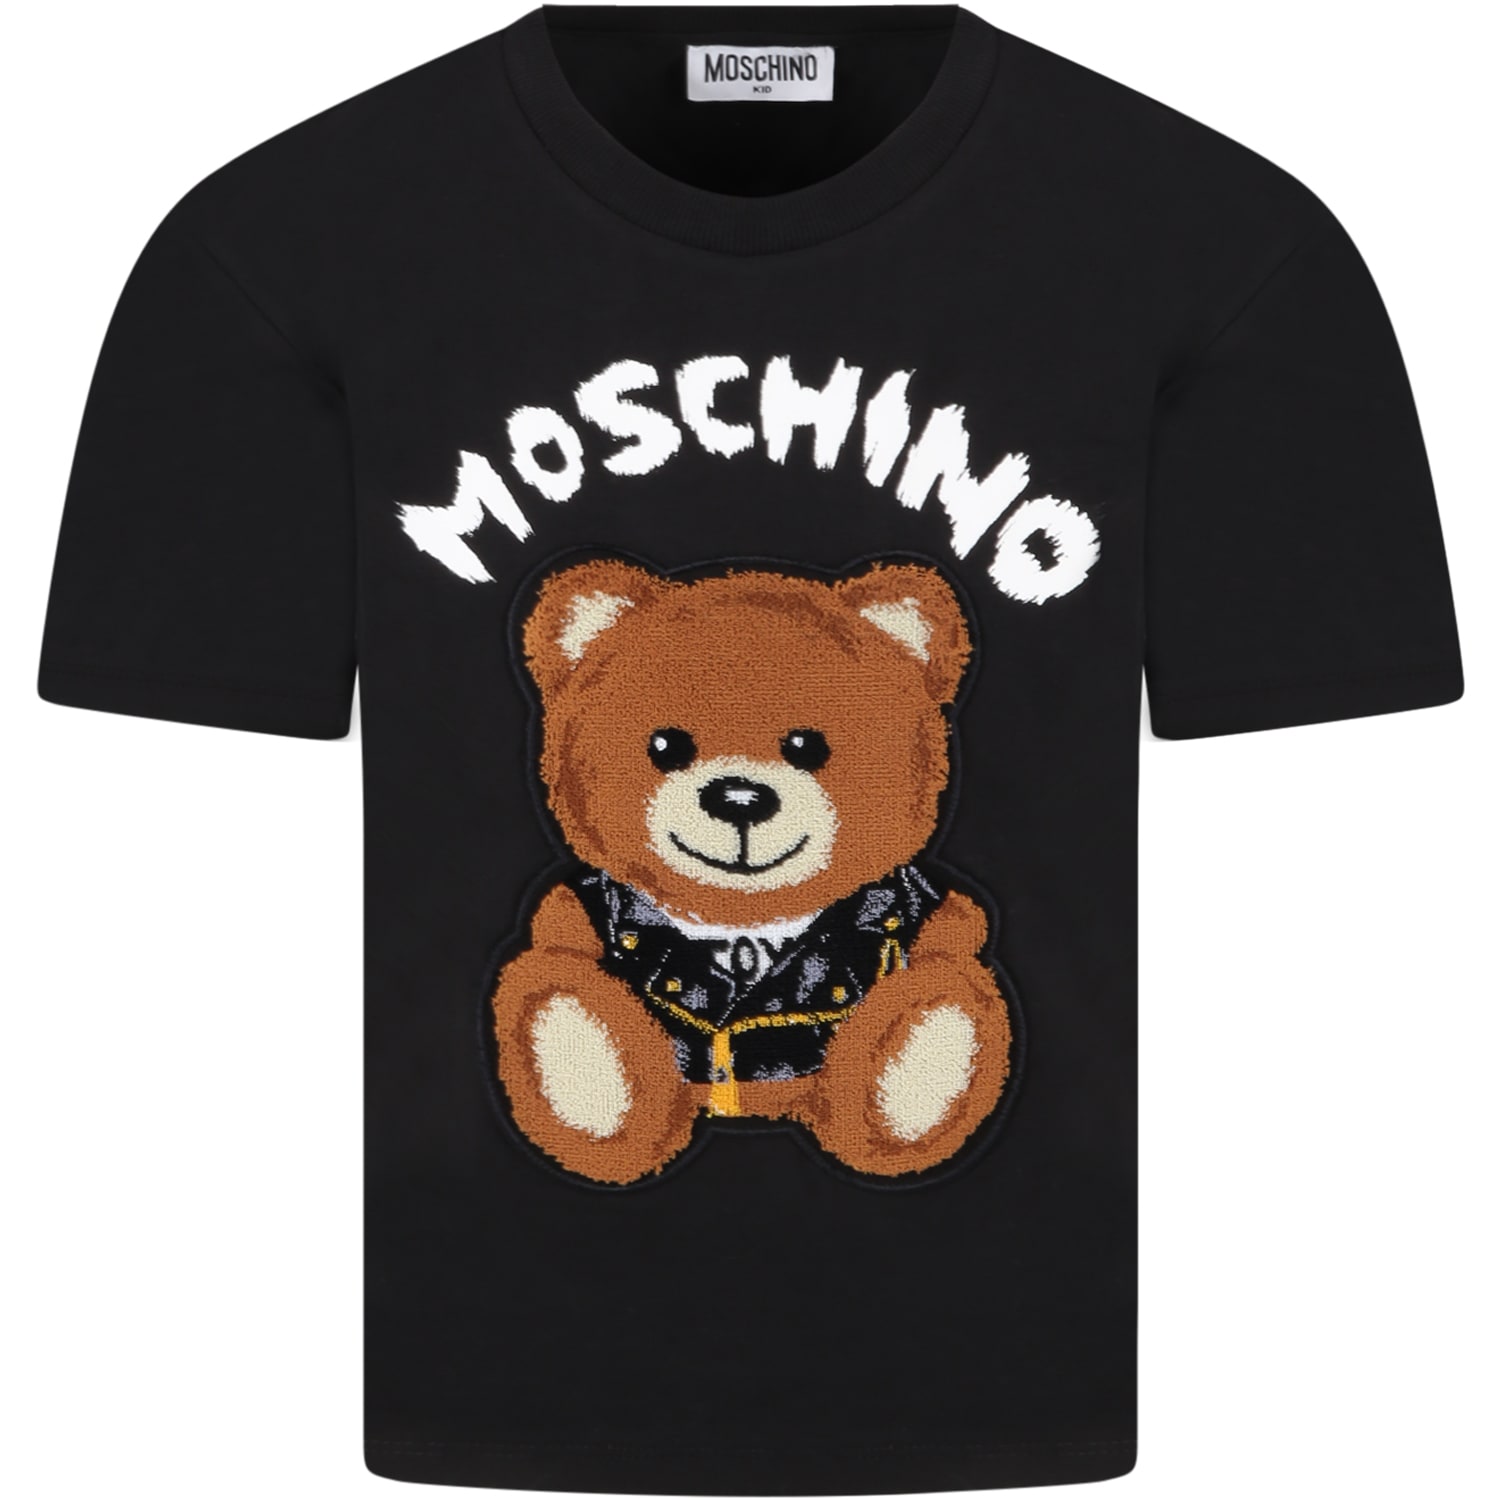 Moschino Black T-shirt For Boy With Logo